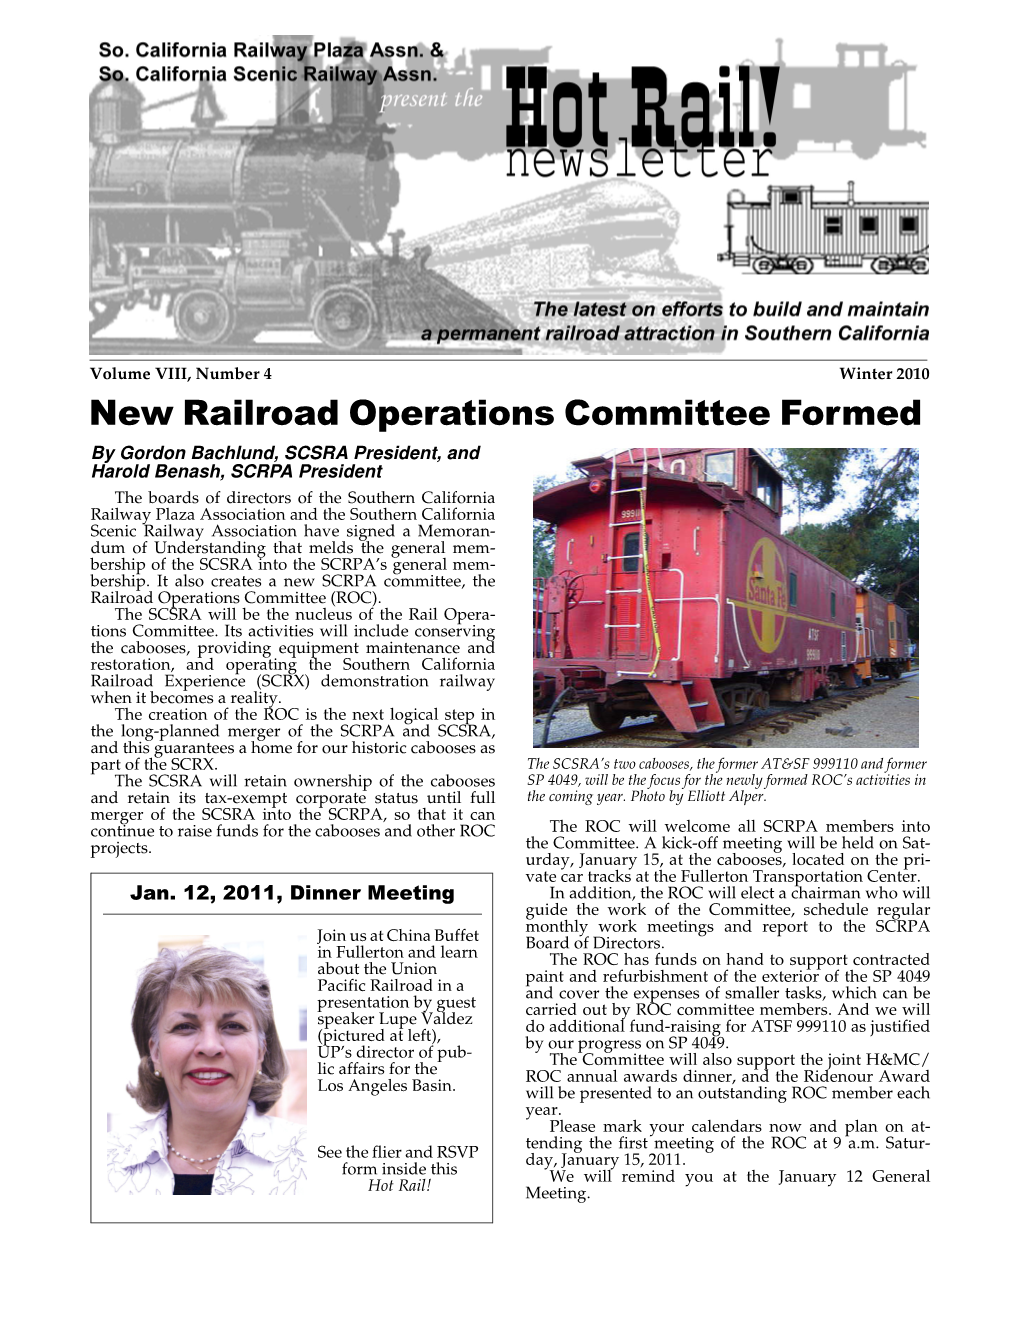 New Railroad Operations Committee Formed